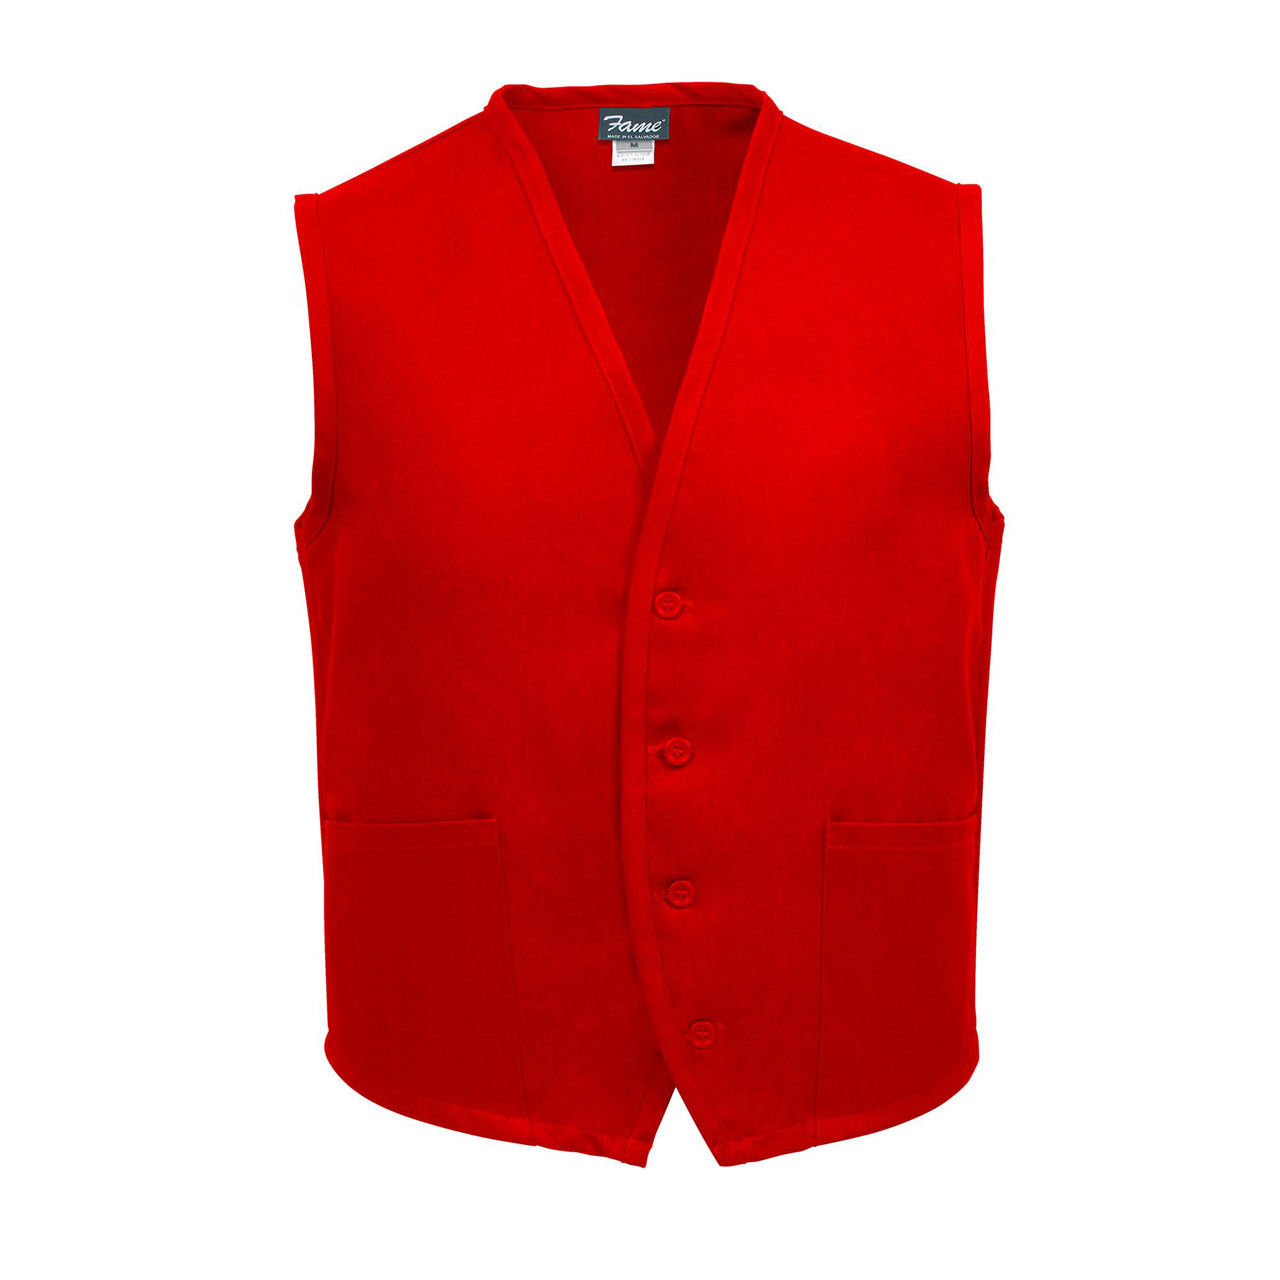 What are the estimated transit times for shipping the red vest?